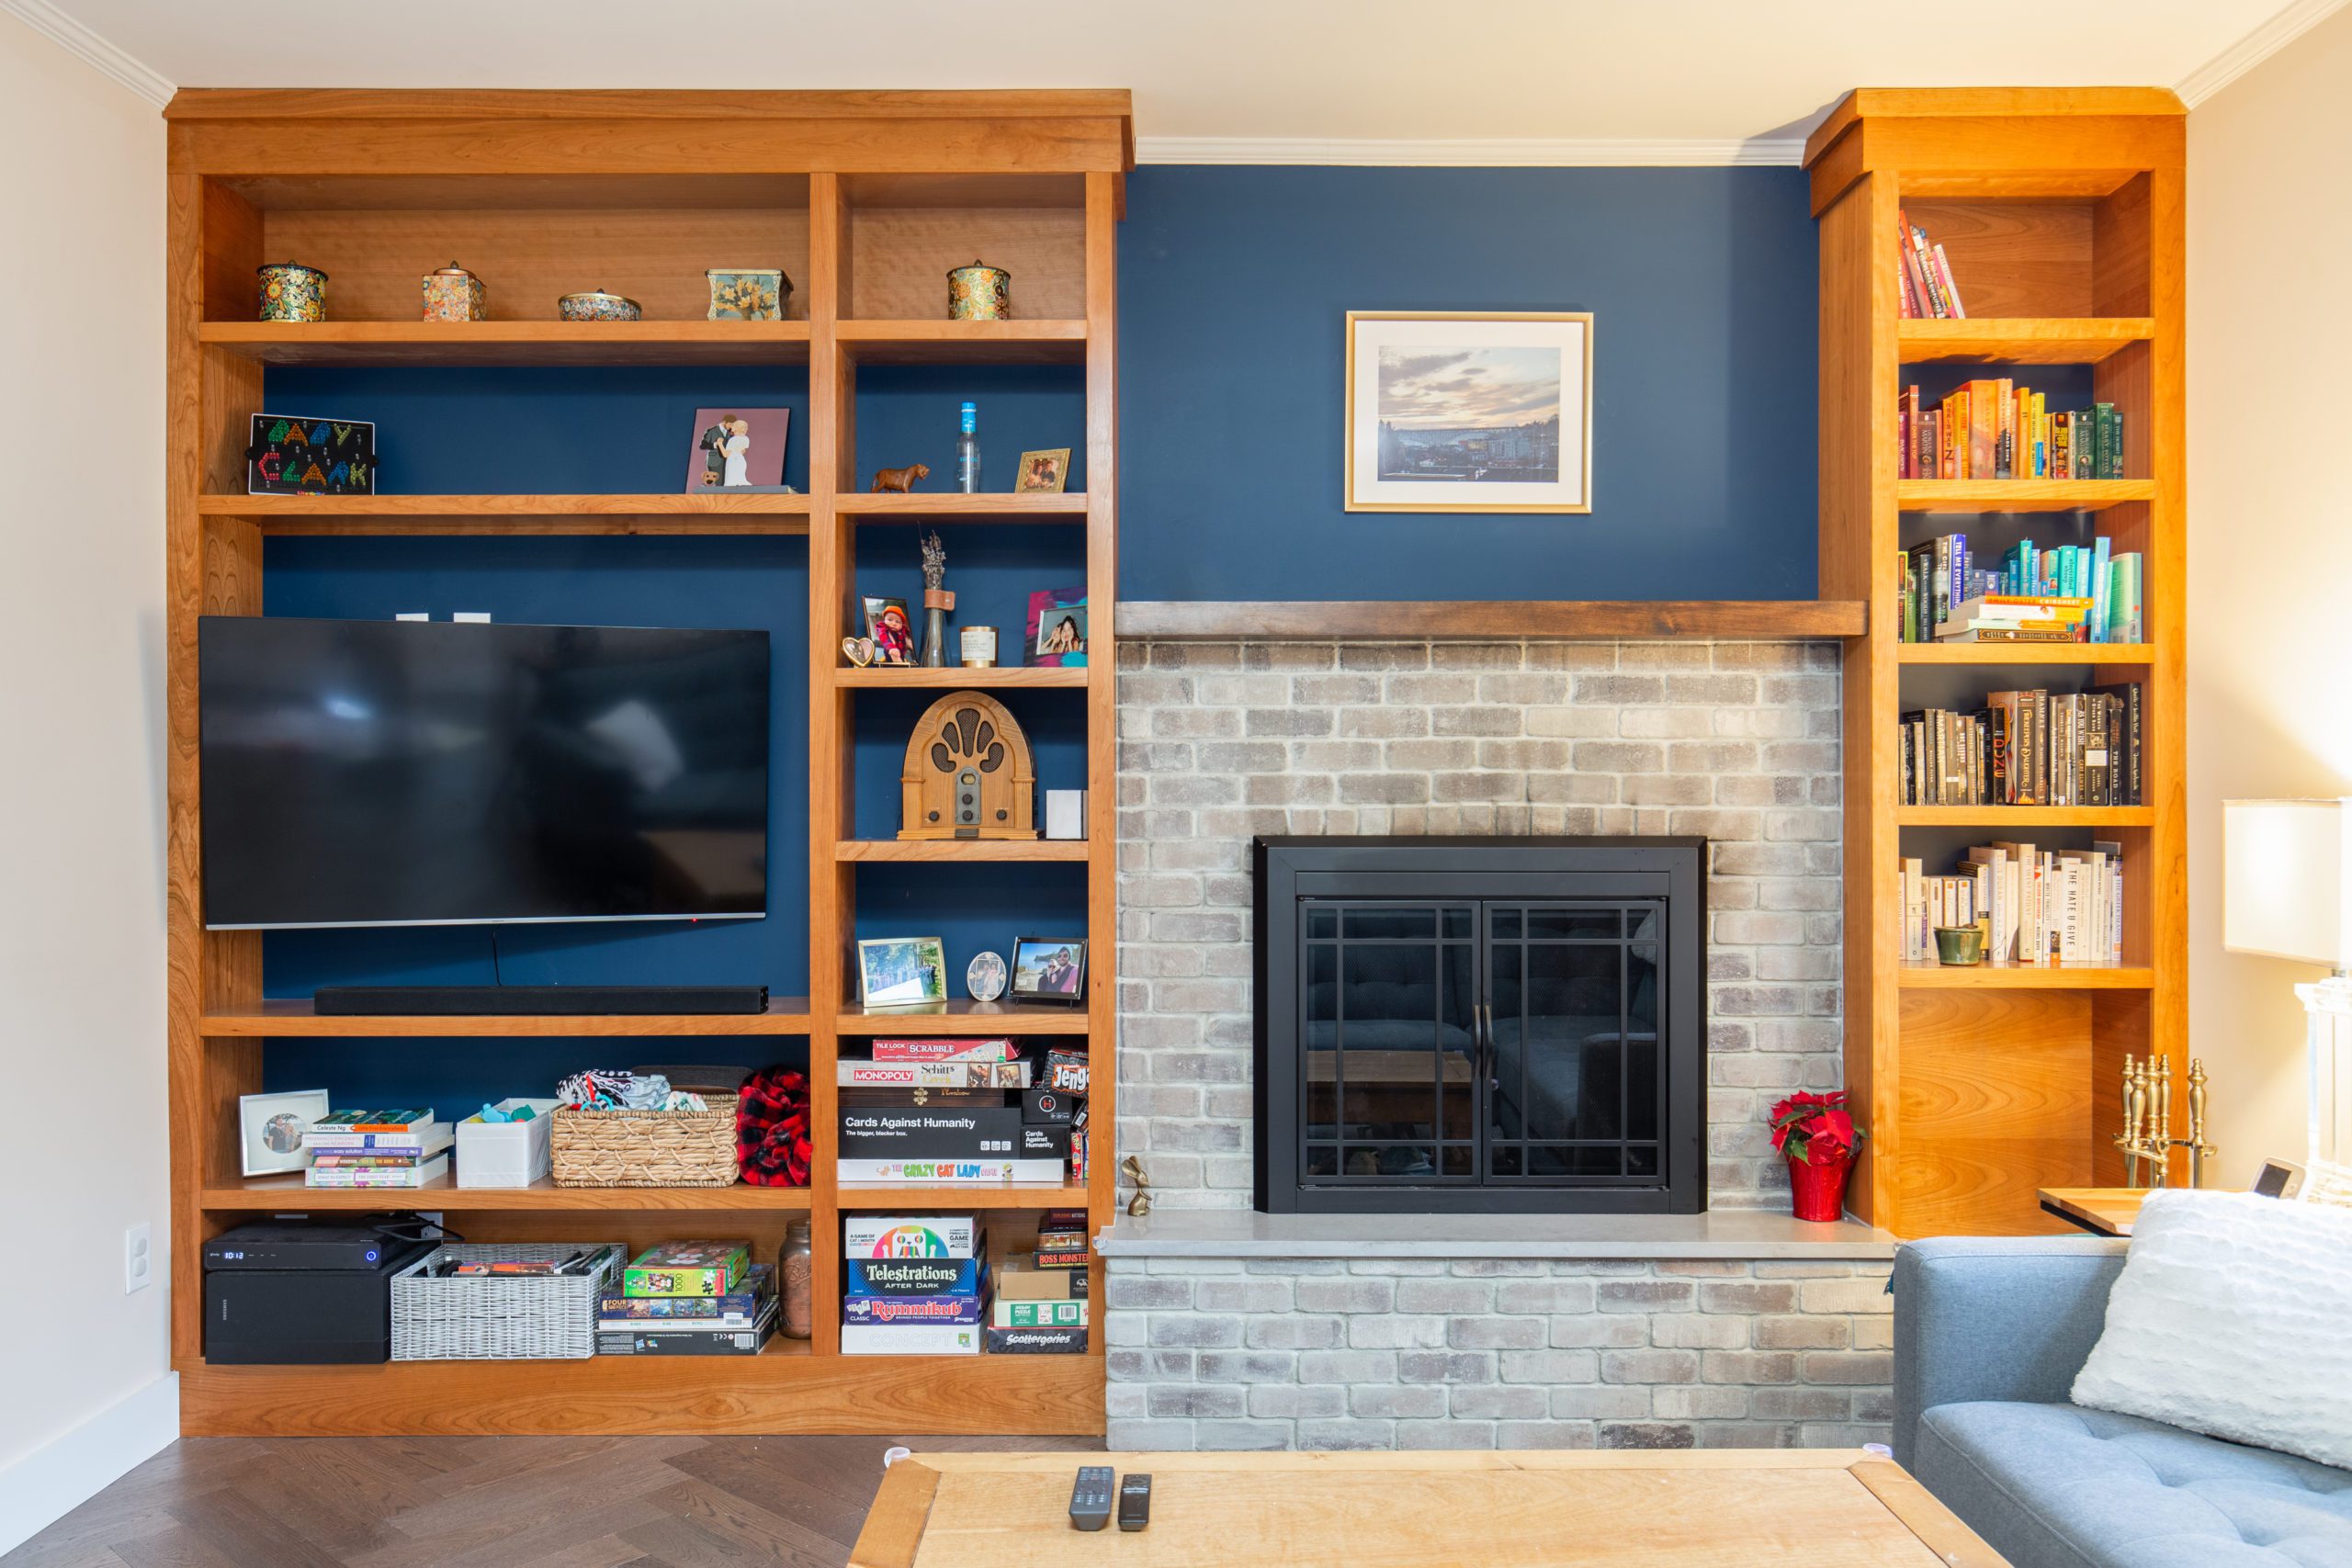 Remodeled wall alcove with a deep blue pain backsplash featuring wooden shelves